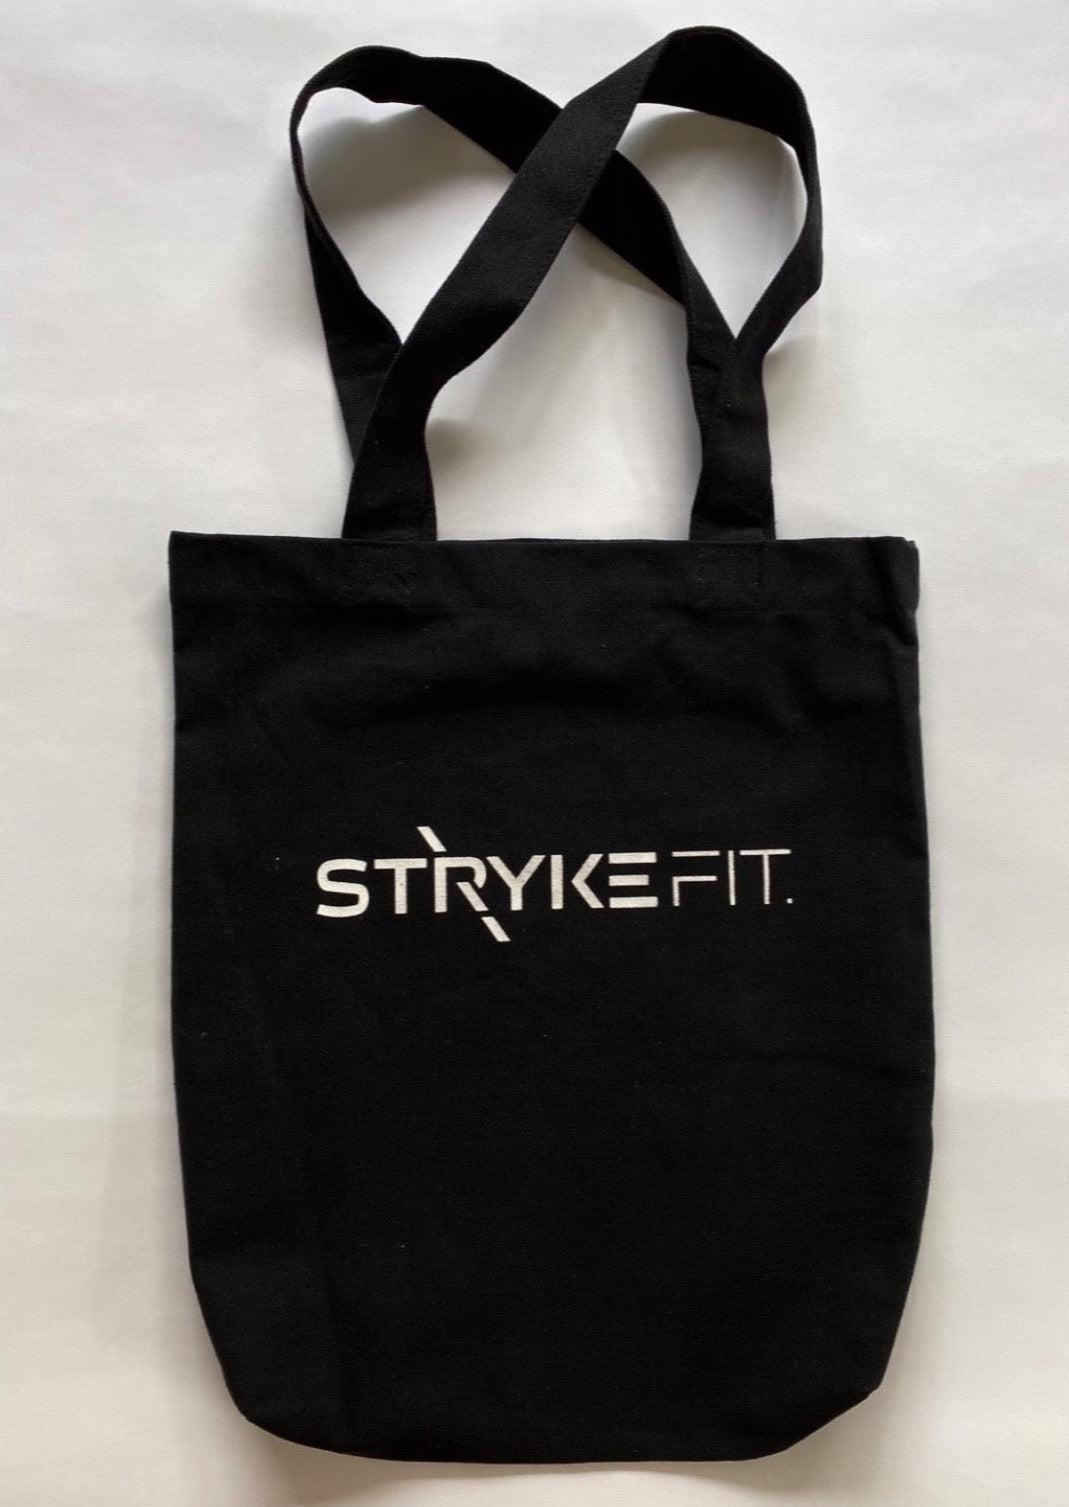 RUN FIT TOTE BAG is the perfect tote to carry your gear. Made from recycled heavy canvas fabric and featuring double long straps this will be your next favorite tote bag